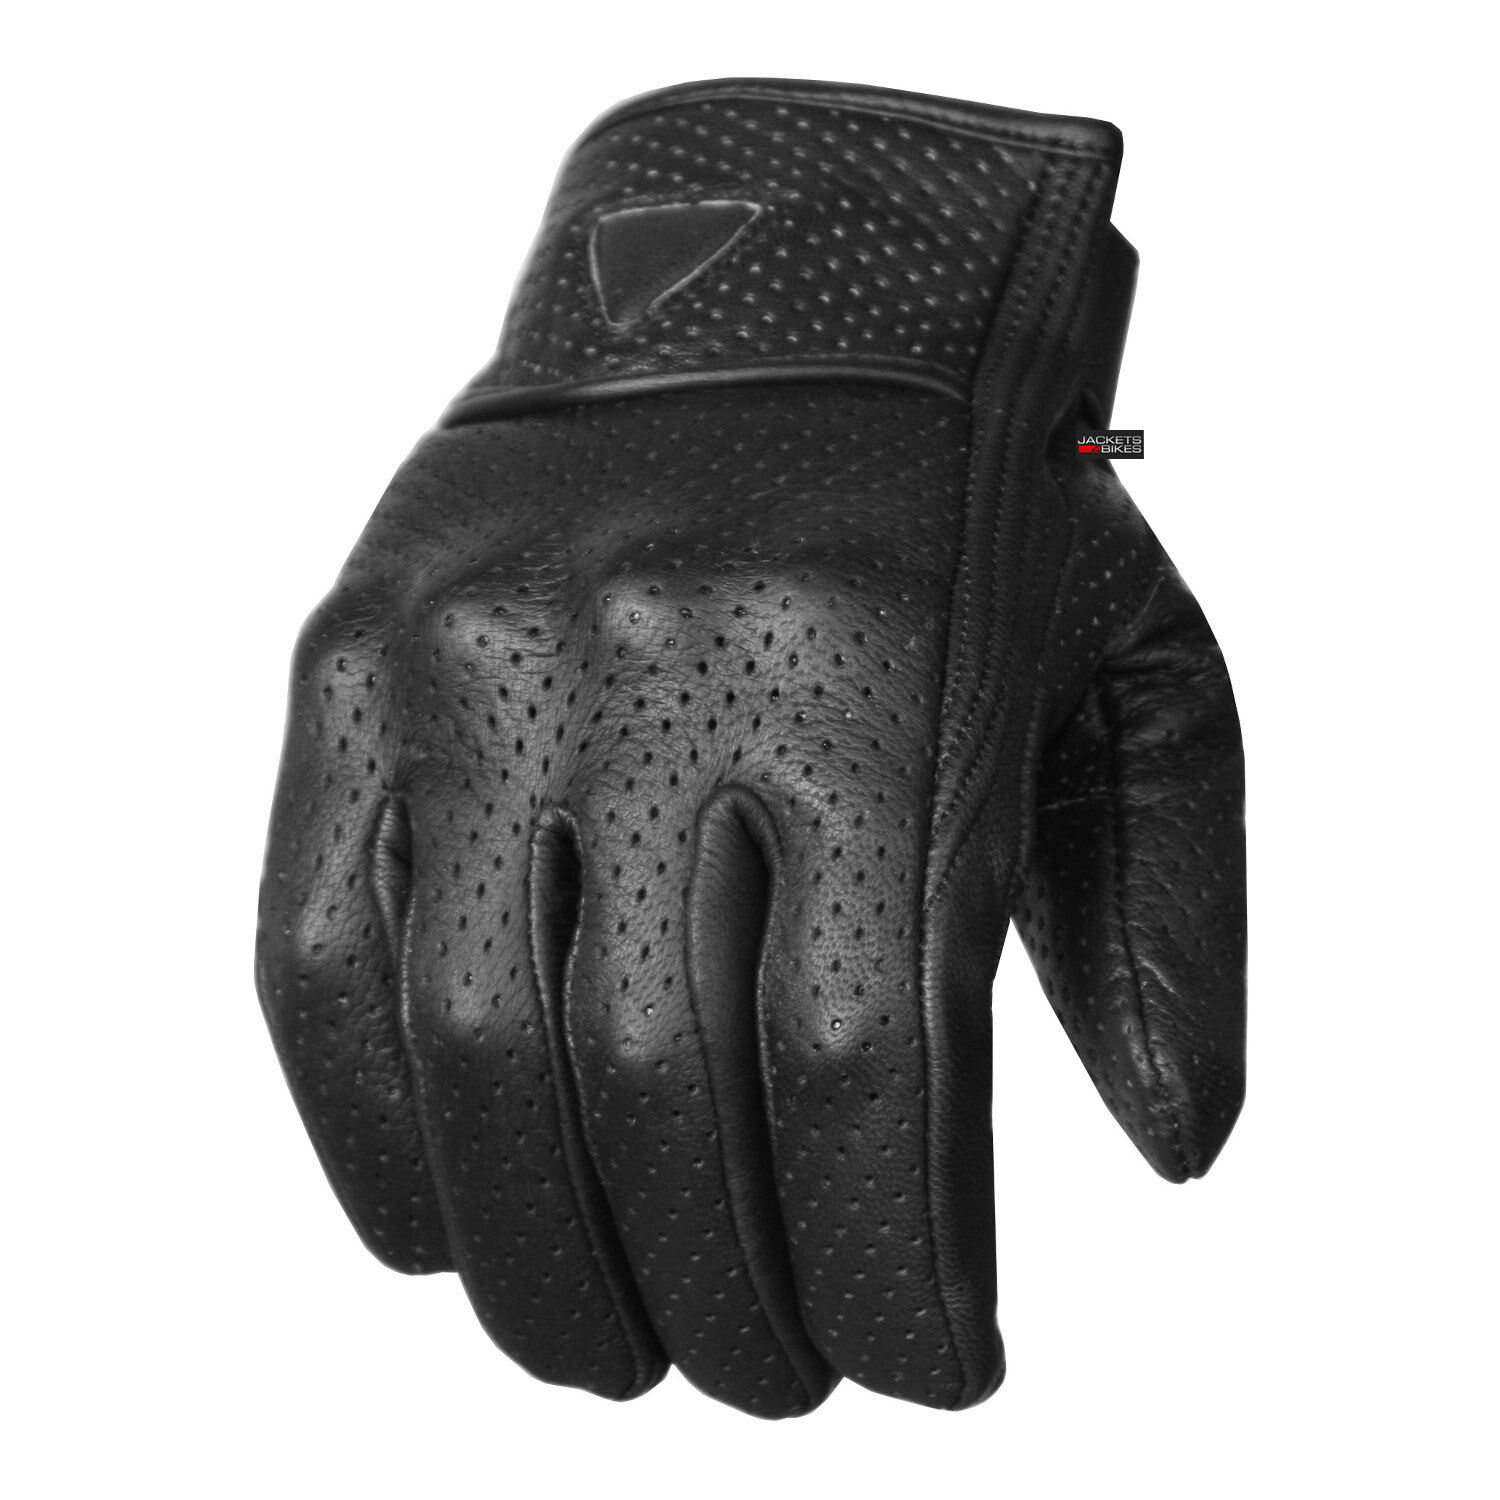 Premium Men's Motorcycle Leather Perforated Cruiser Protective Gel Padded Gloves